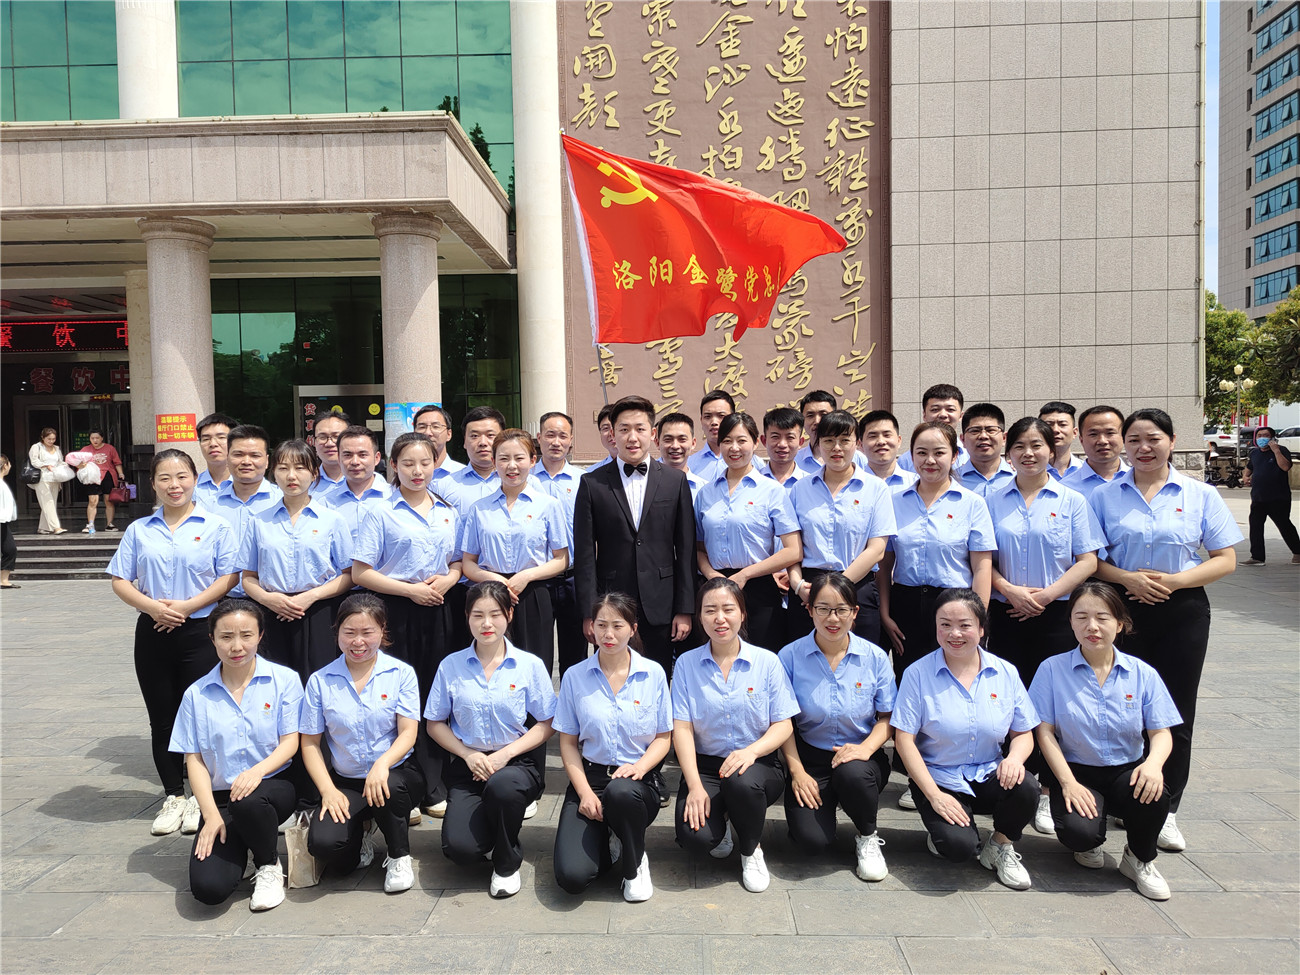 Luoyang Jinlu Cemented Carbide Tools Co., Ltd. participated in the “Stars Illuminate Central Plains Singing a New Era” in the High-tech Zone of the High-tech Zone-a mass chorus competition celebrating the 100th anniversary of the founding of the Communist Party of China